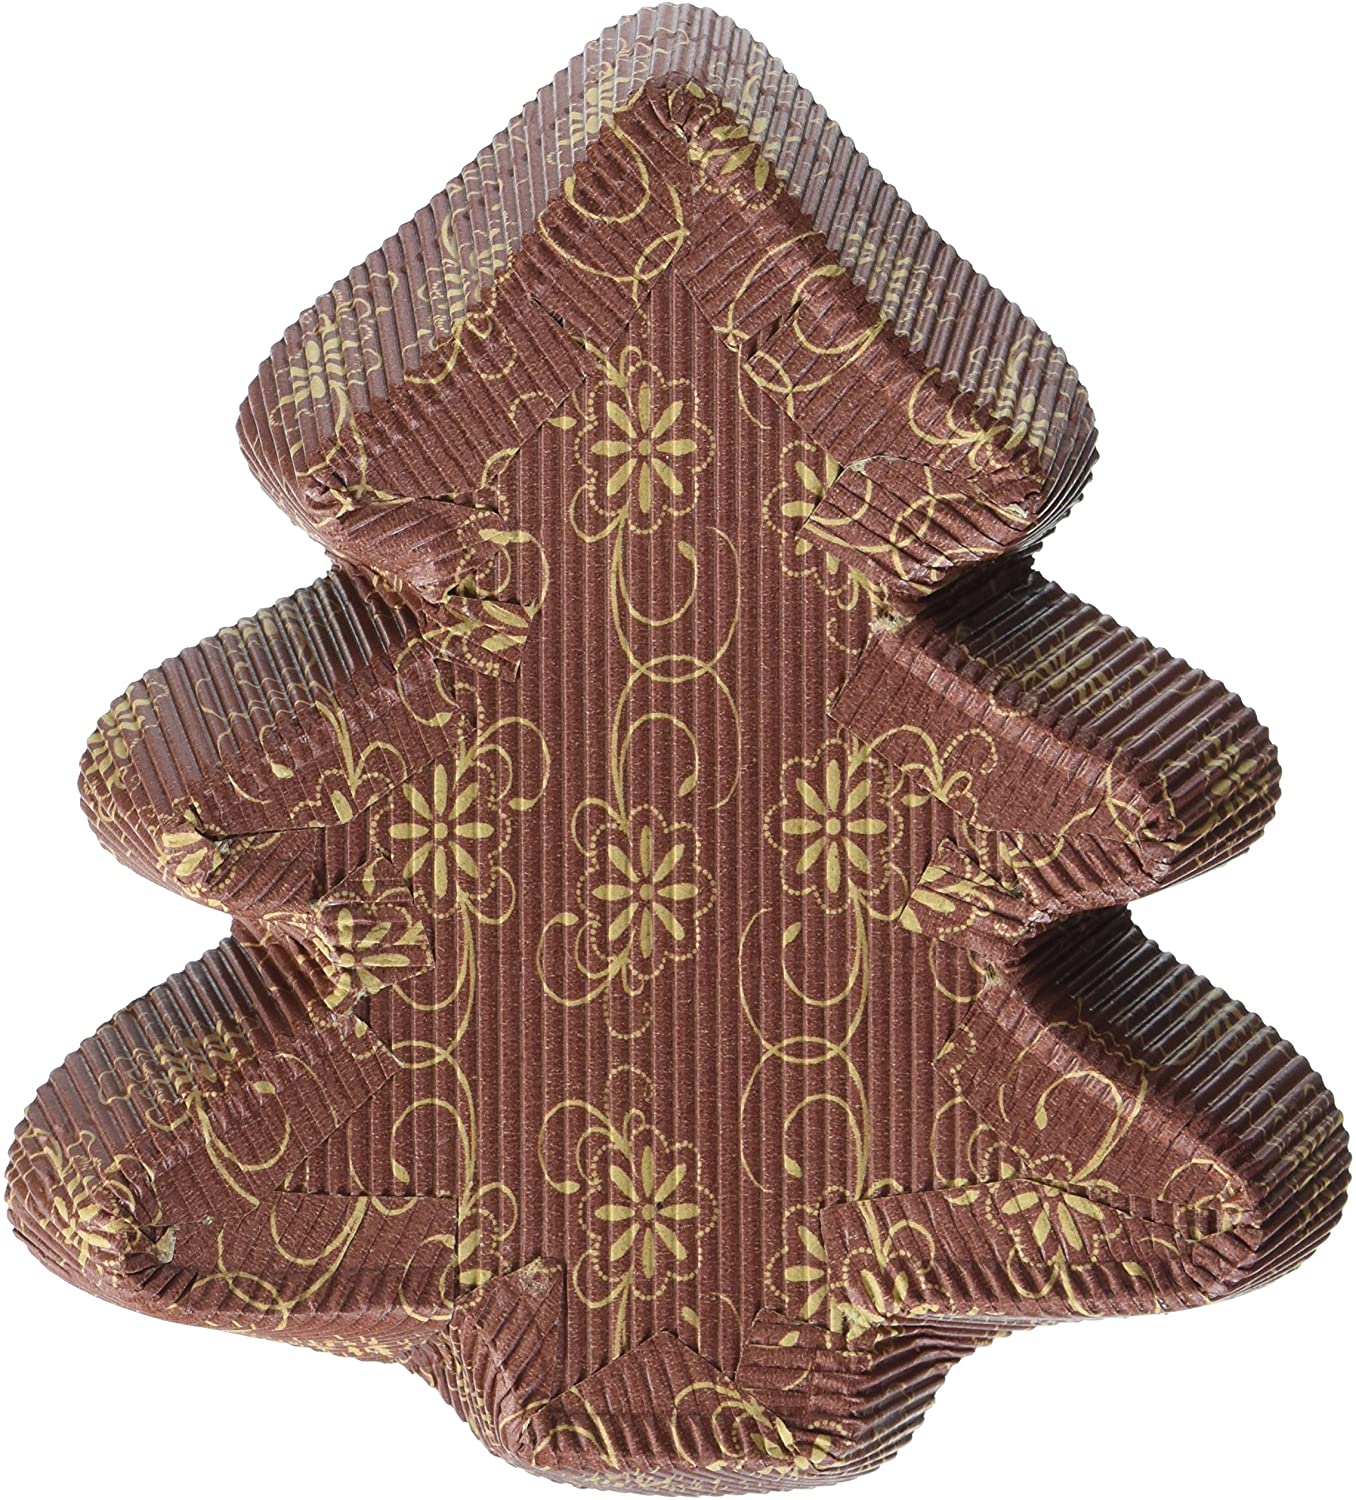 Städter 903760 Paper Baking Mould Christmas Tree